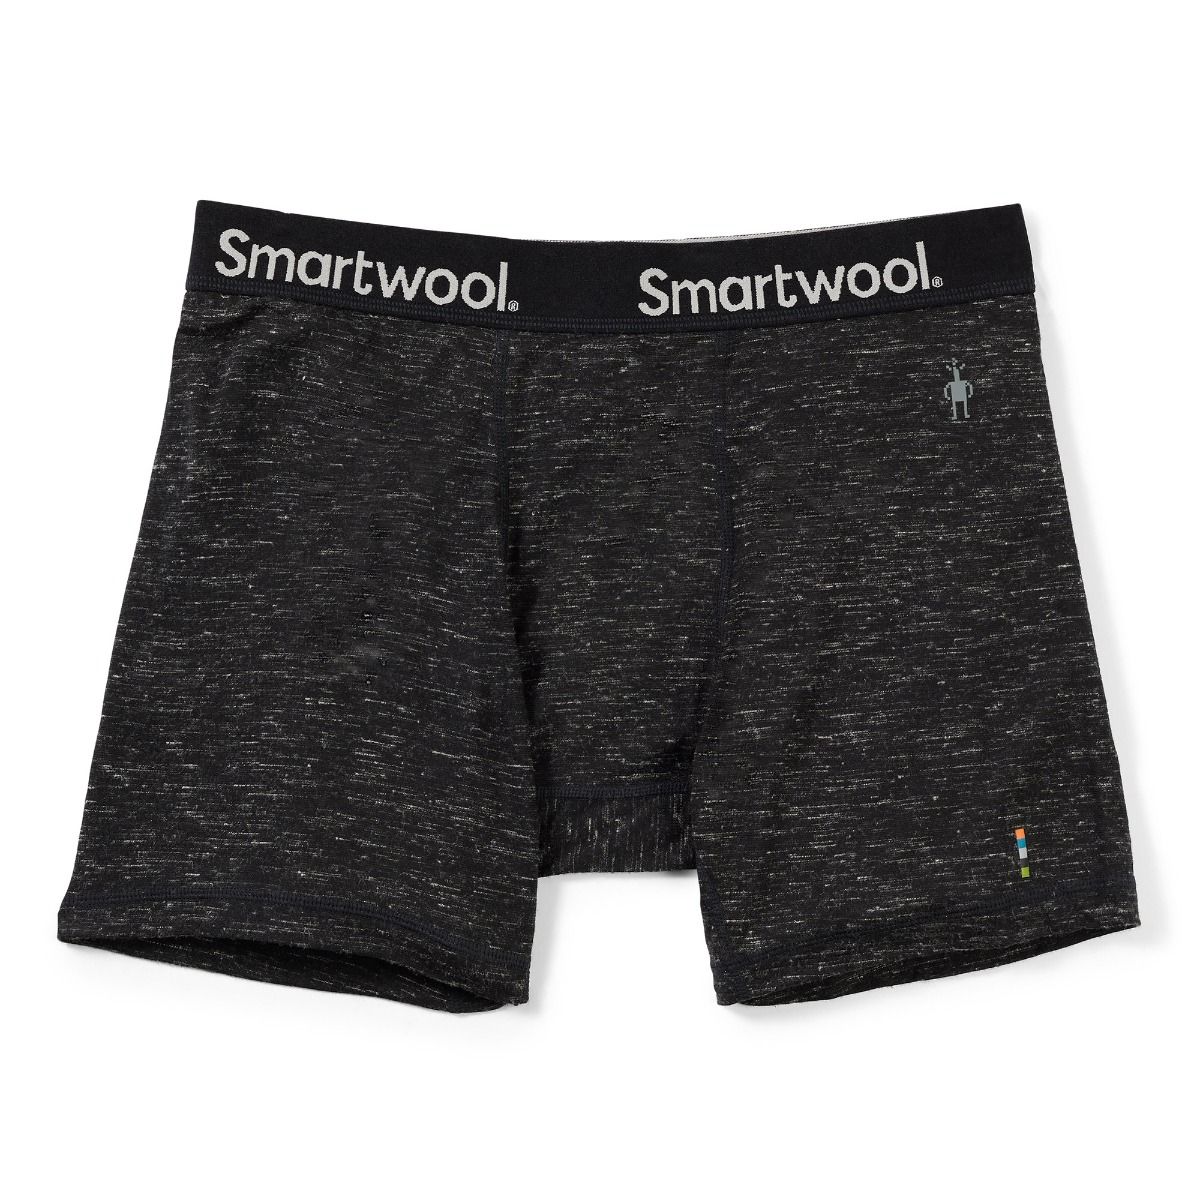 https://smartwool.ca/media/catalog/product/cache/7b241bfd6c26fd1ffc0d56d7717f5c2b/s/w/sw016532a52-1-p_1.jpg